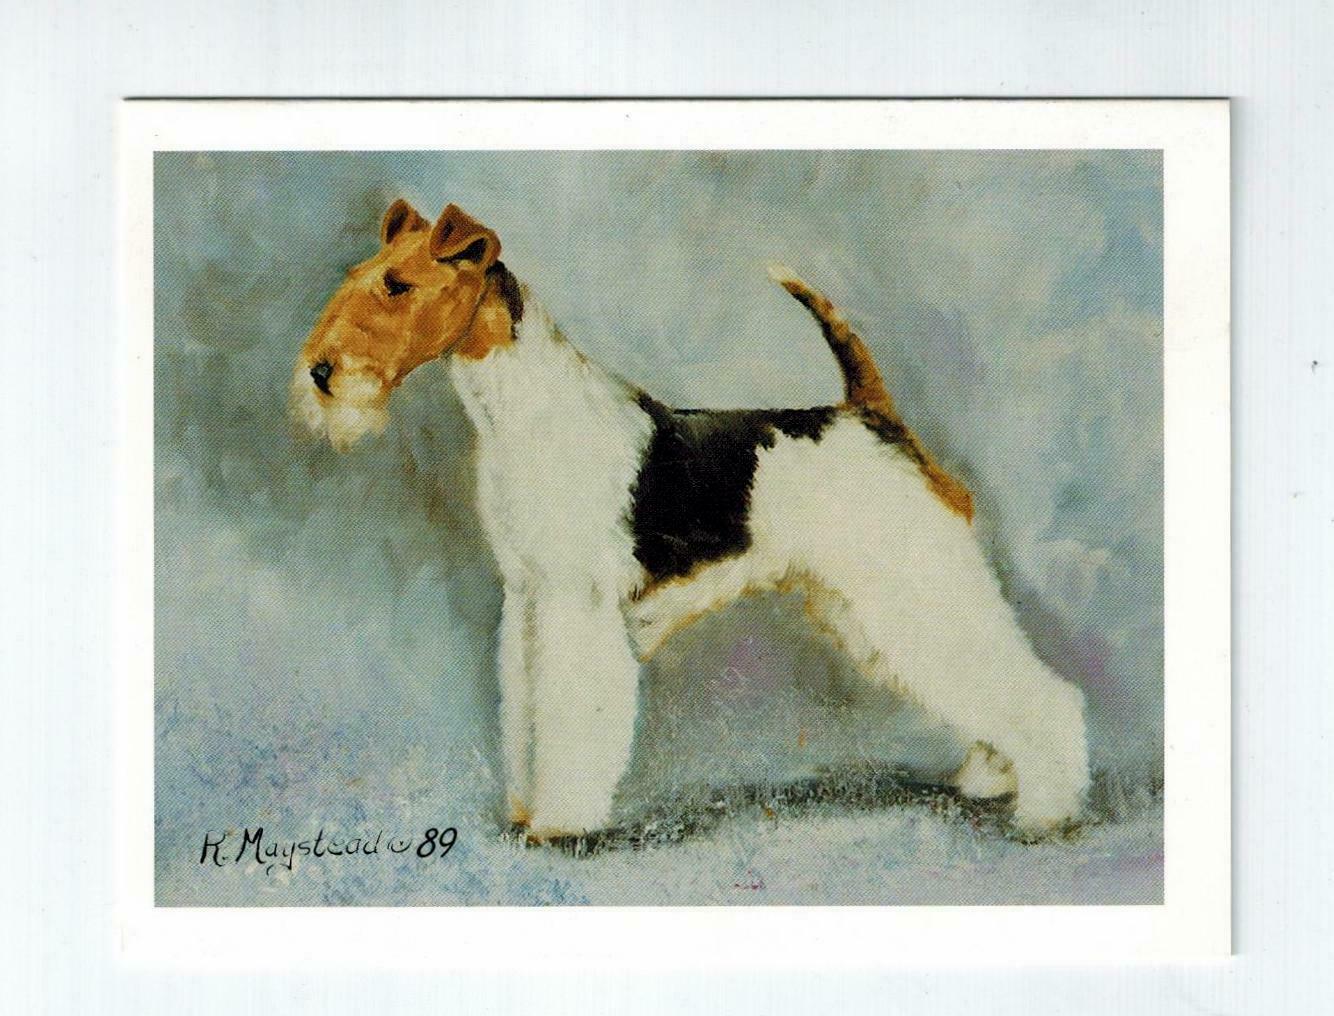 Wirehaired Fox Terrier Profile Notecards - 12 Note Cards By Ruth Maystead FXT-4